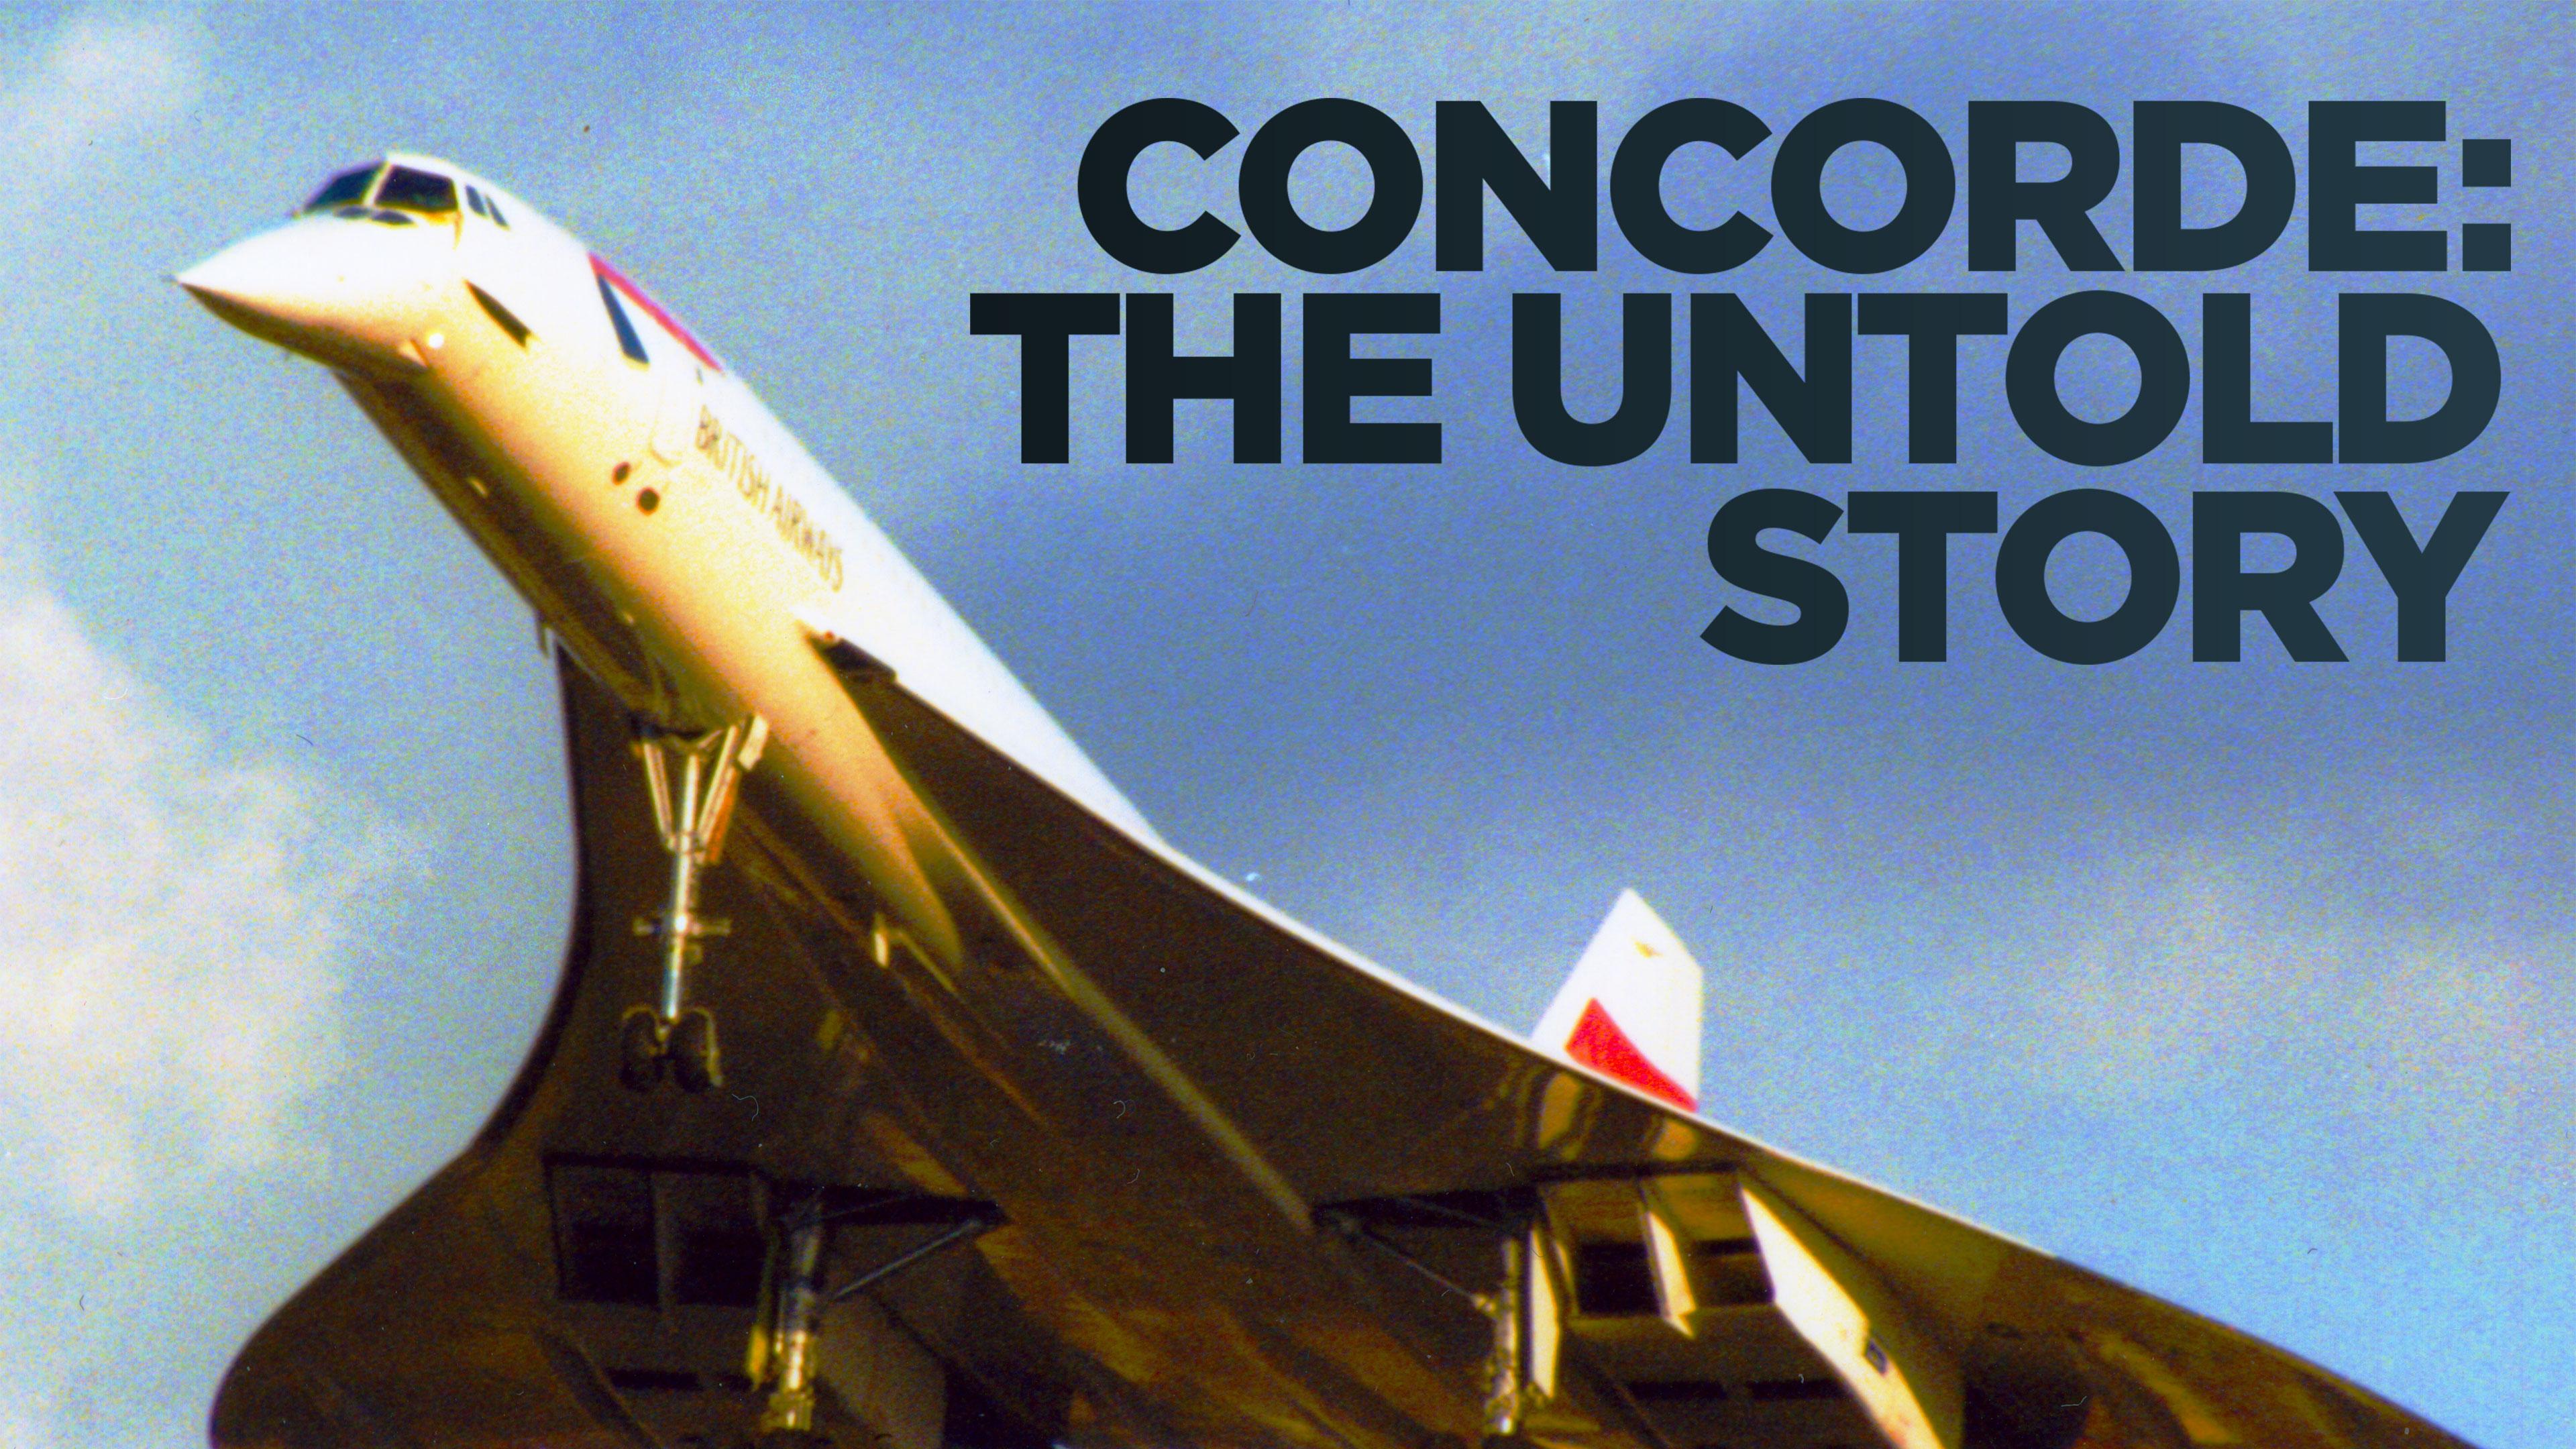 Watch Concorde: The Untold Story Streaming Online on Philo (Free Trial)